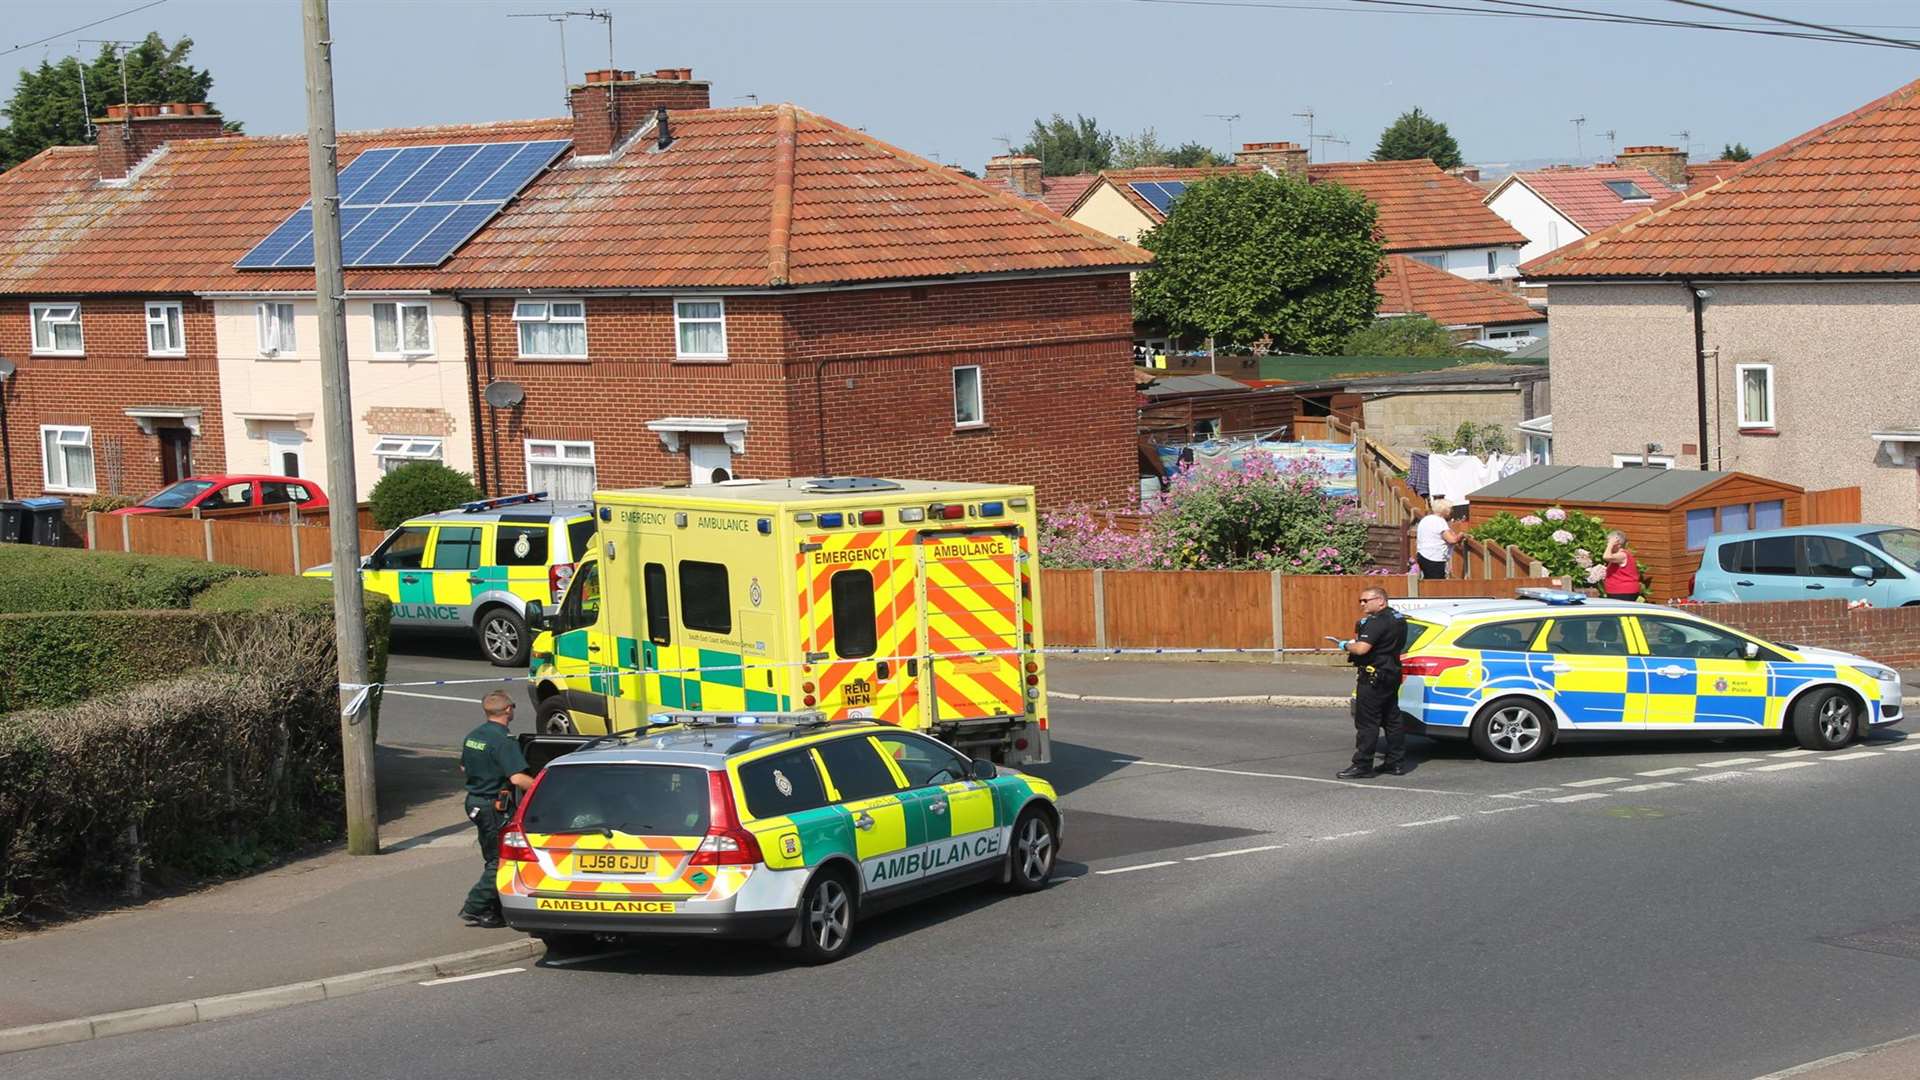 Emergency services descended on Redsull Avenue after reports of a suspected stabbing